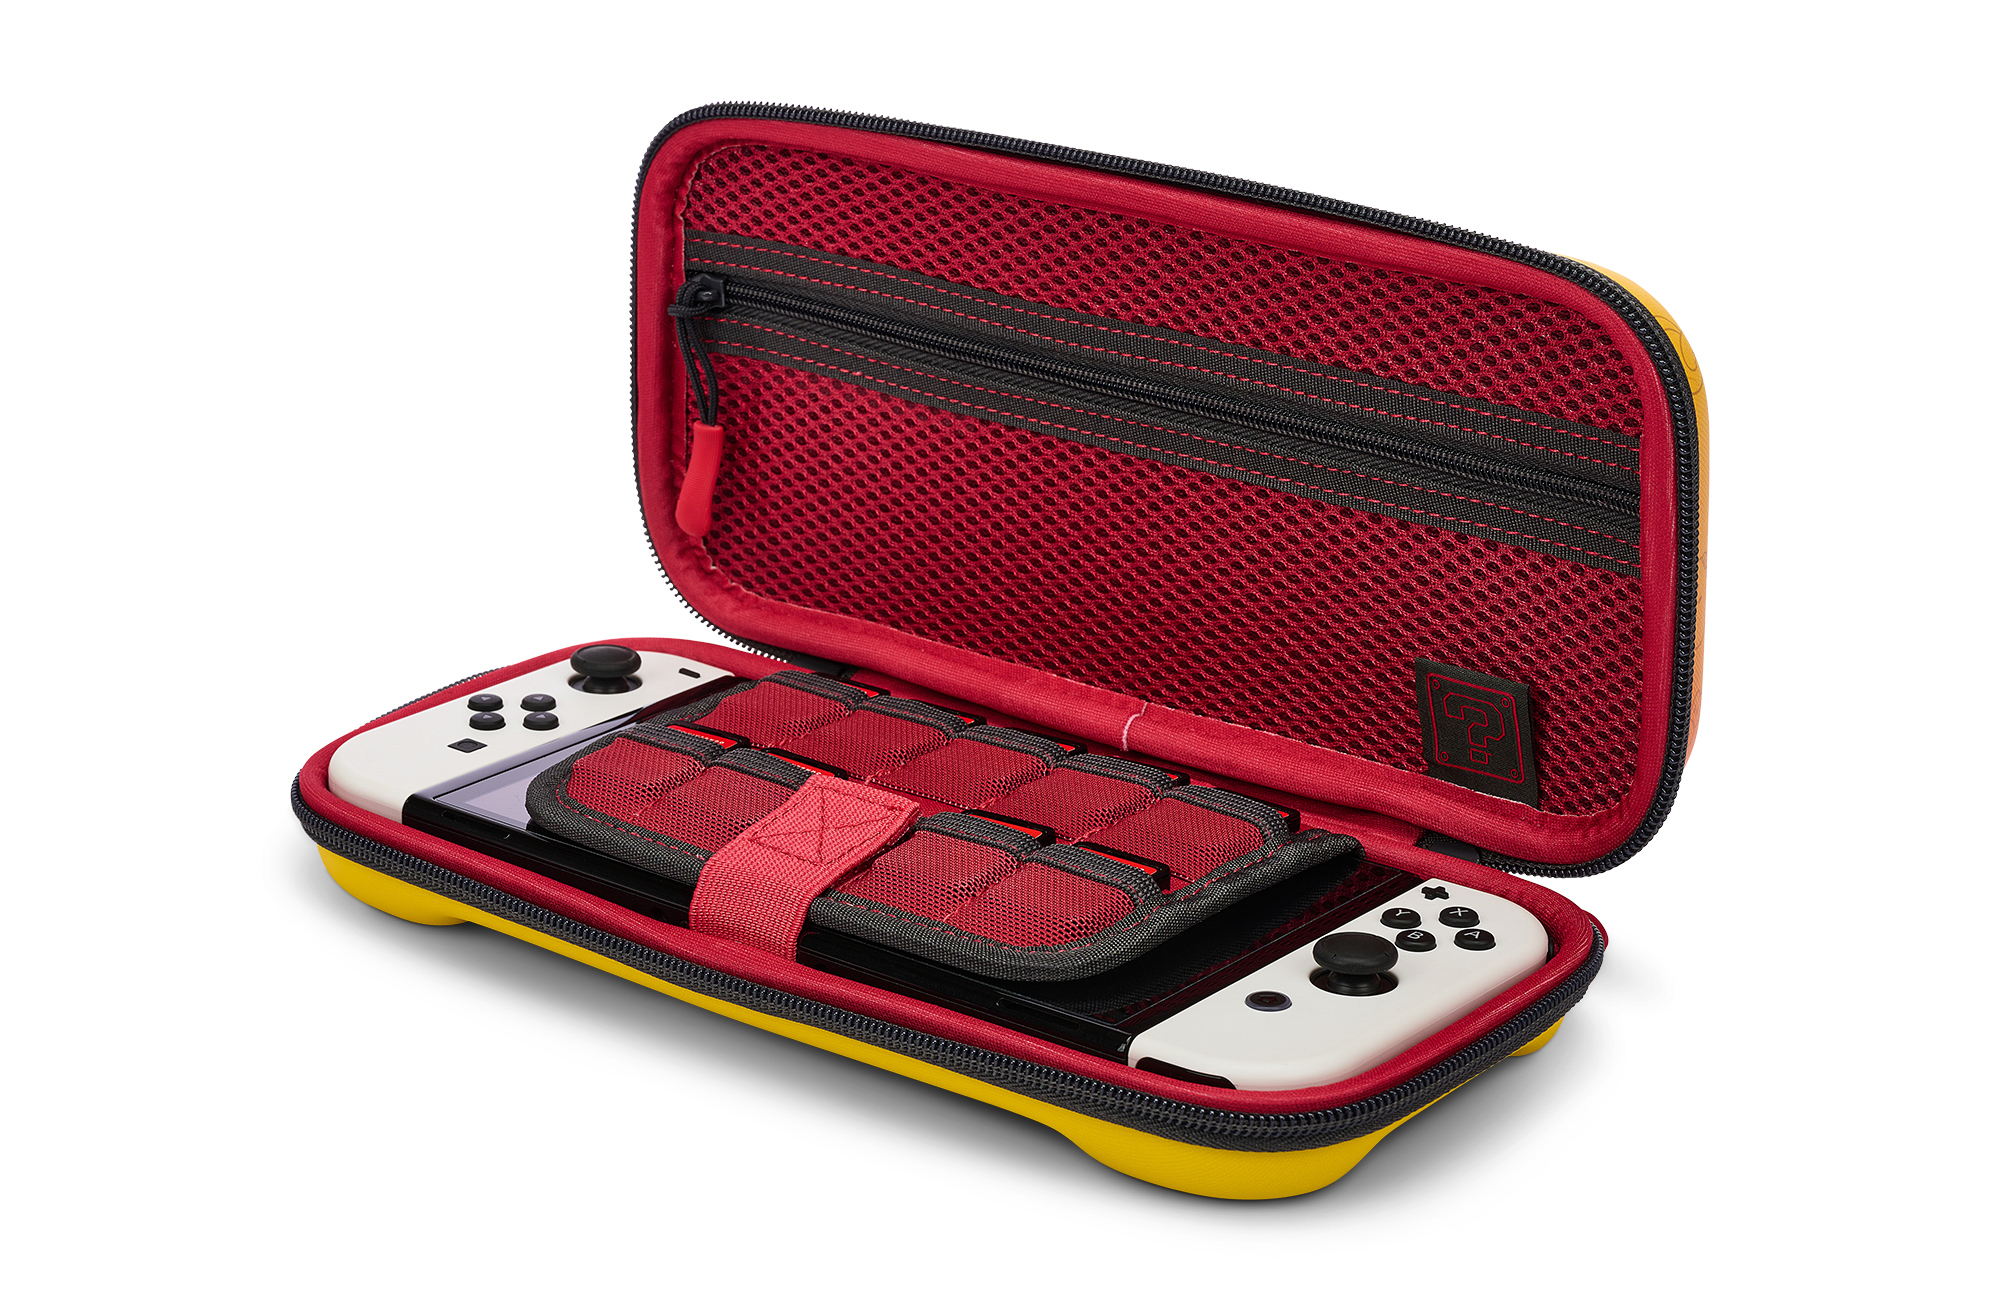 Nintendo Switch Protection Case - Mario & Friends